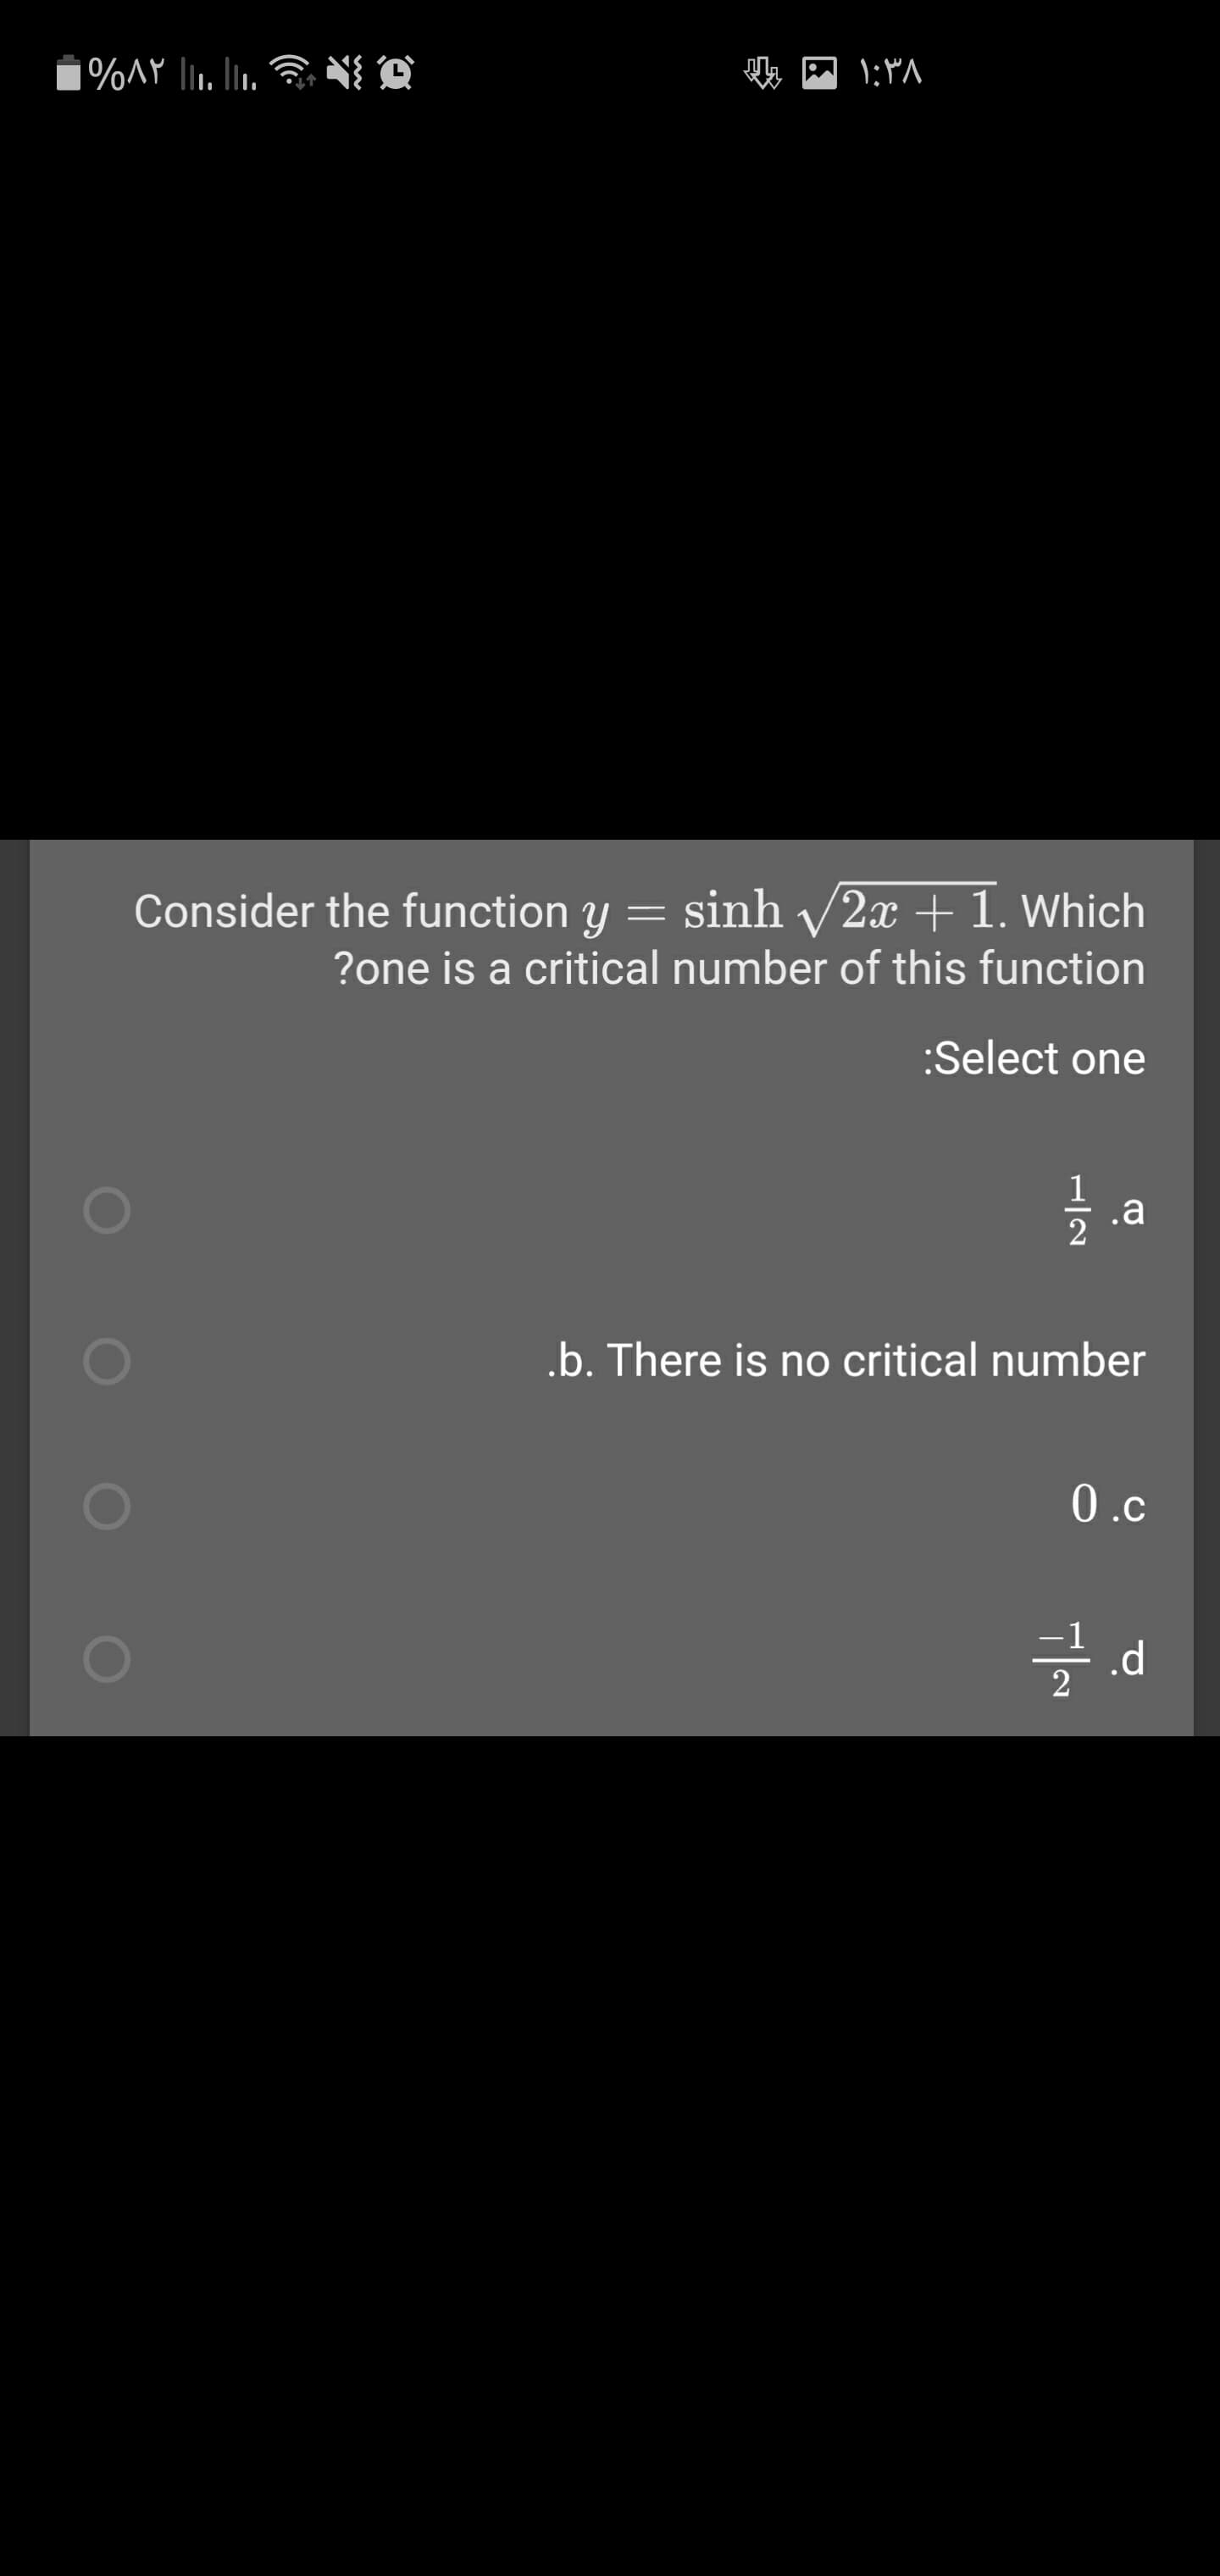 Consider the function y = sinh 2x + 1. Which
?one is a critical number of this function
